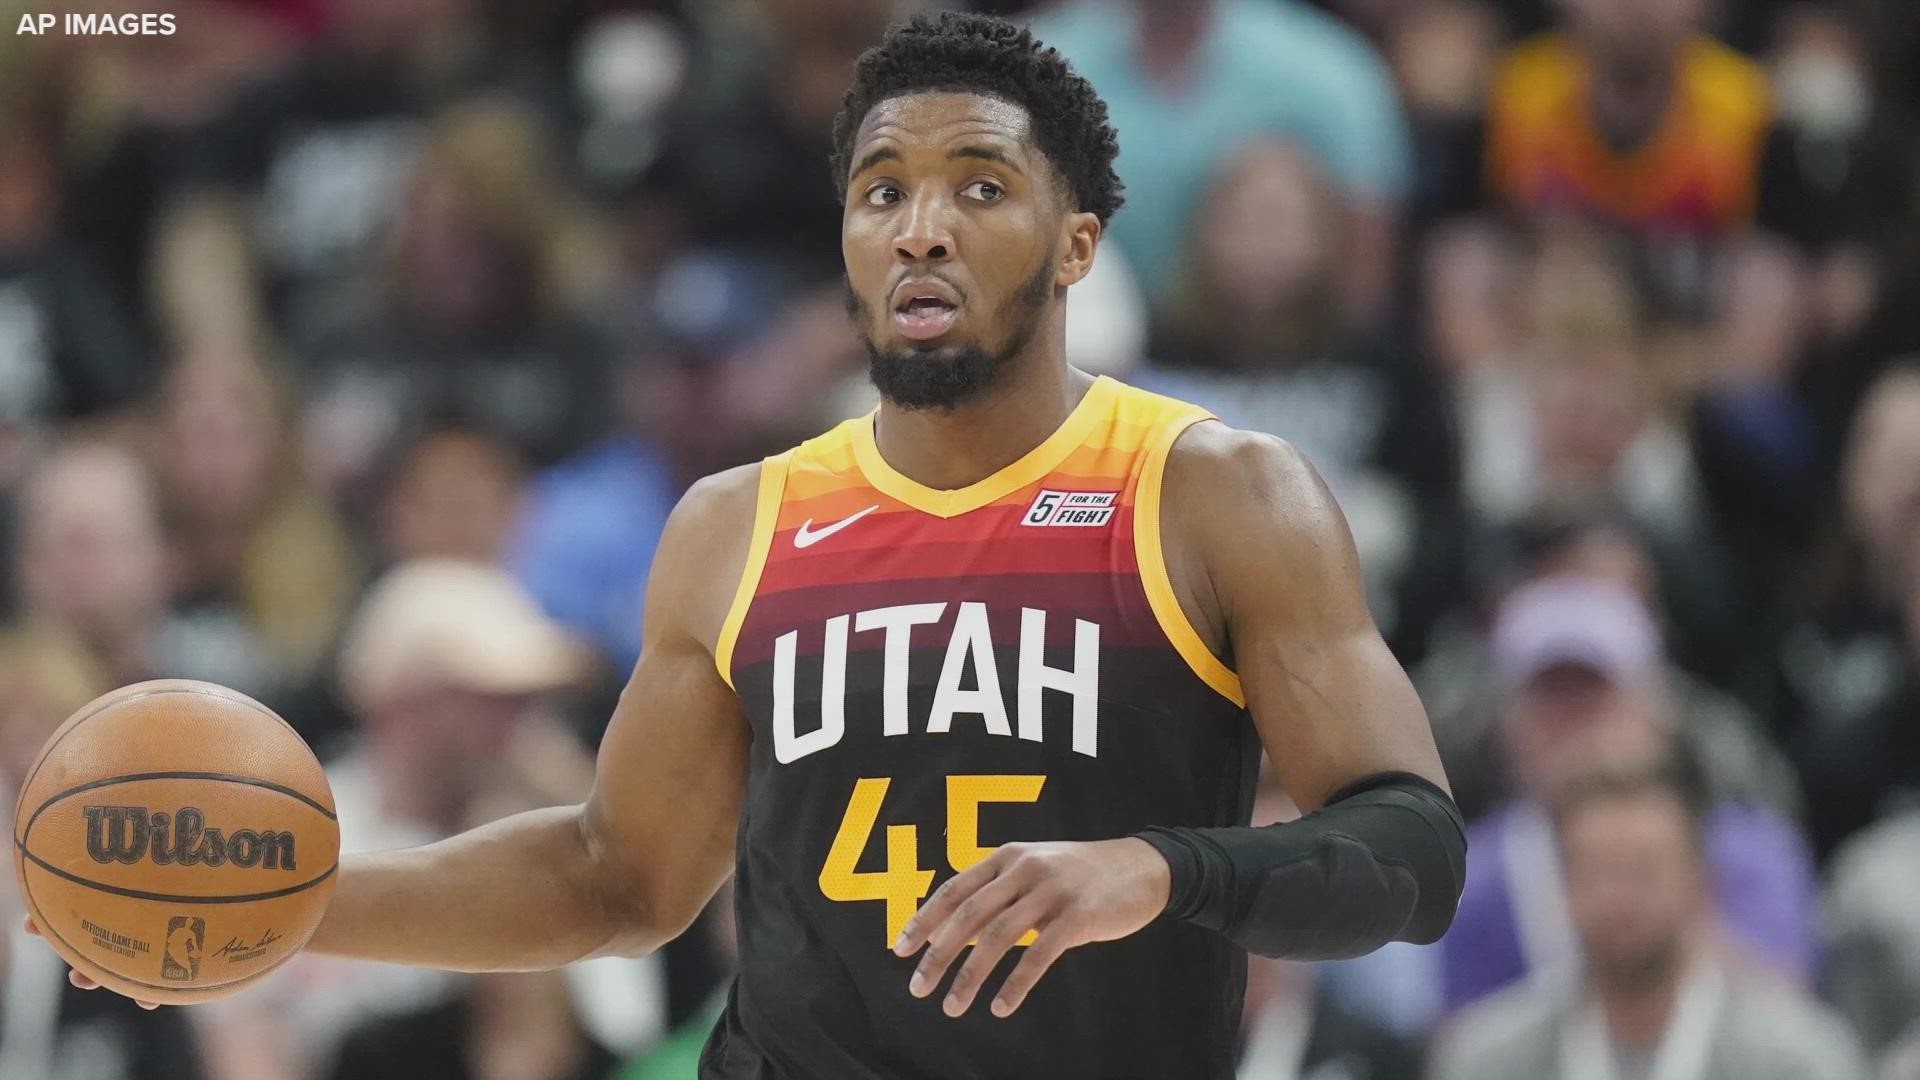 According to ESPN's Adrian Wojnarowski, the Cleveland Cavaliers have acquired All-Star guard Donovan Mitchell.